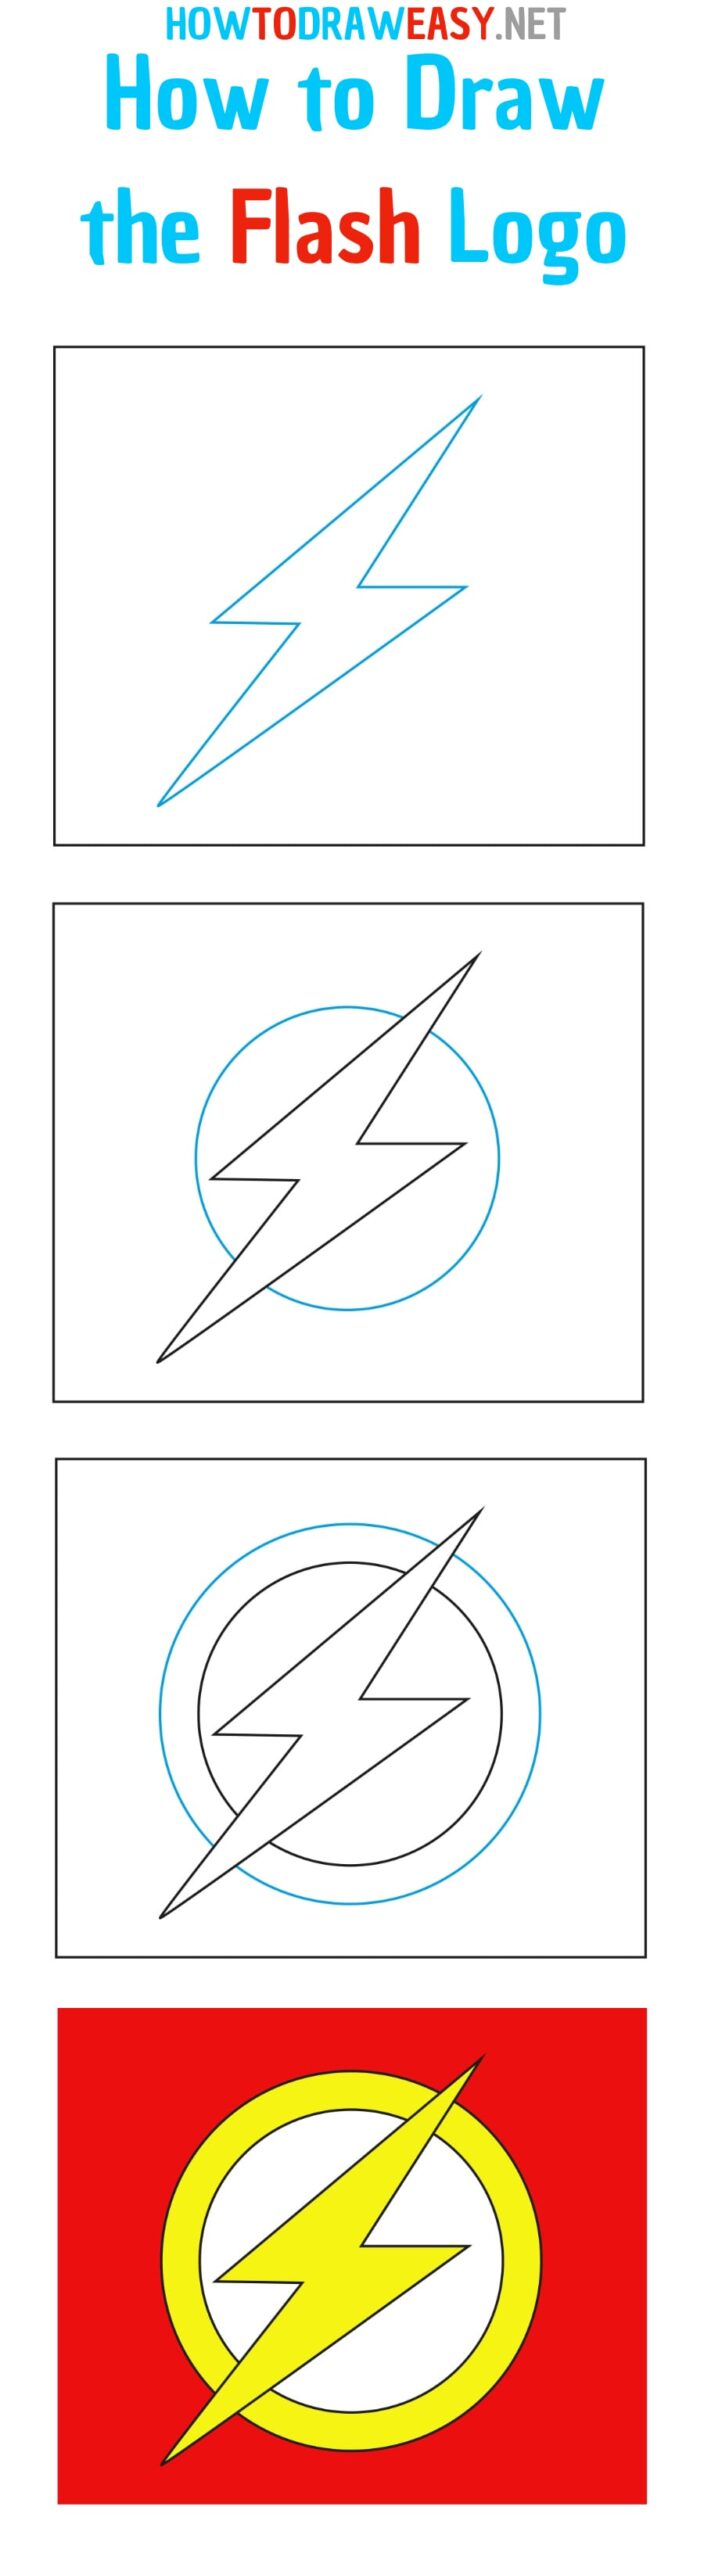 How to Draw the Flash Logo Step by Step